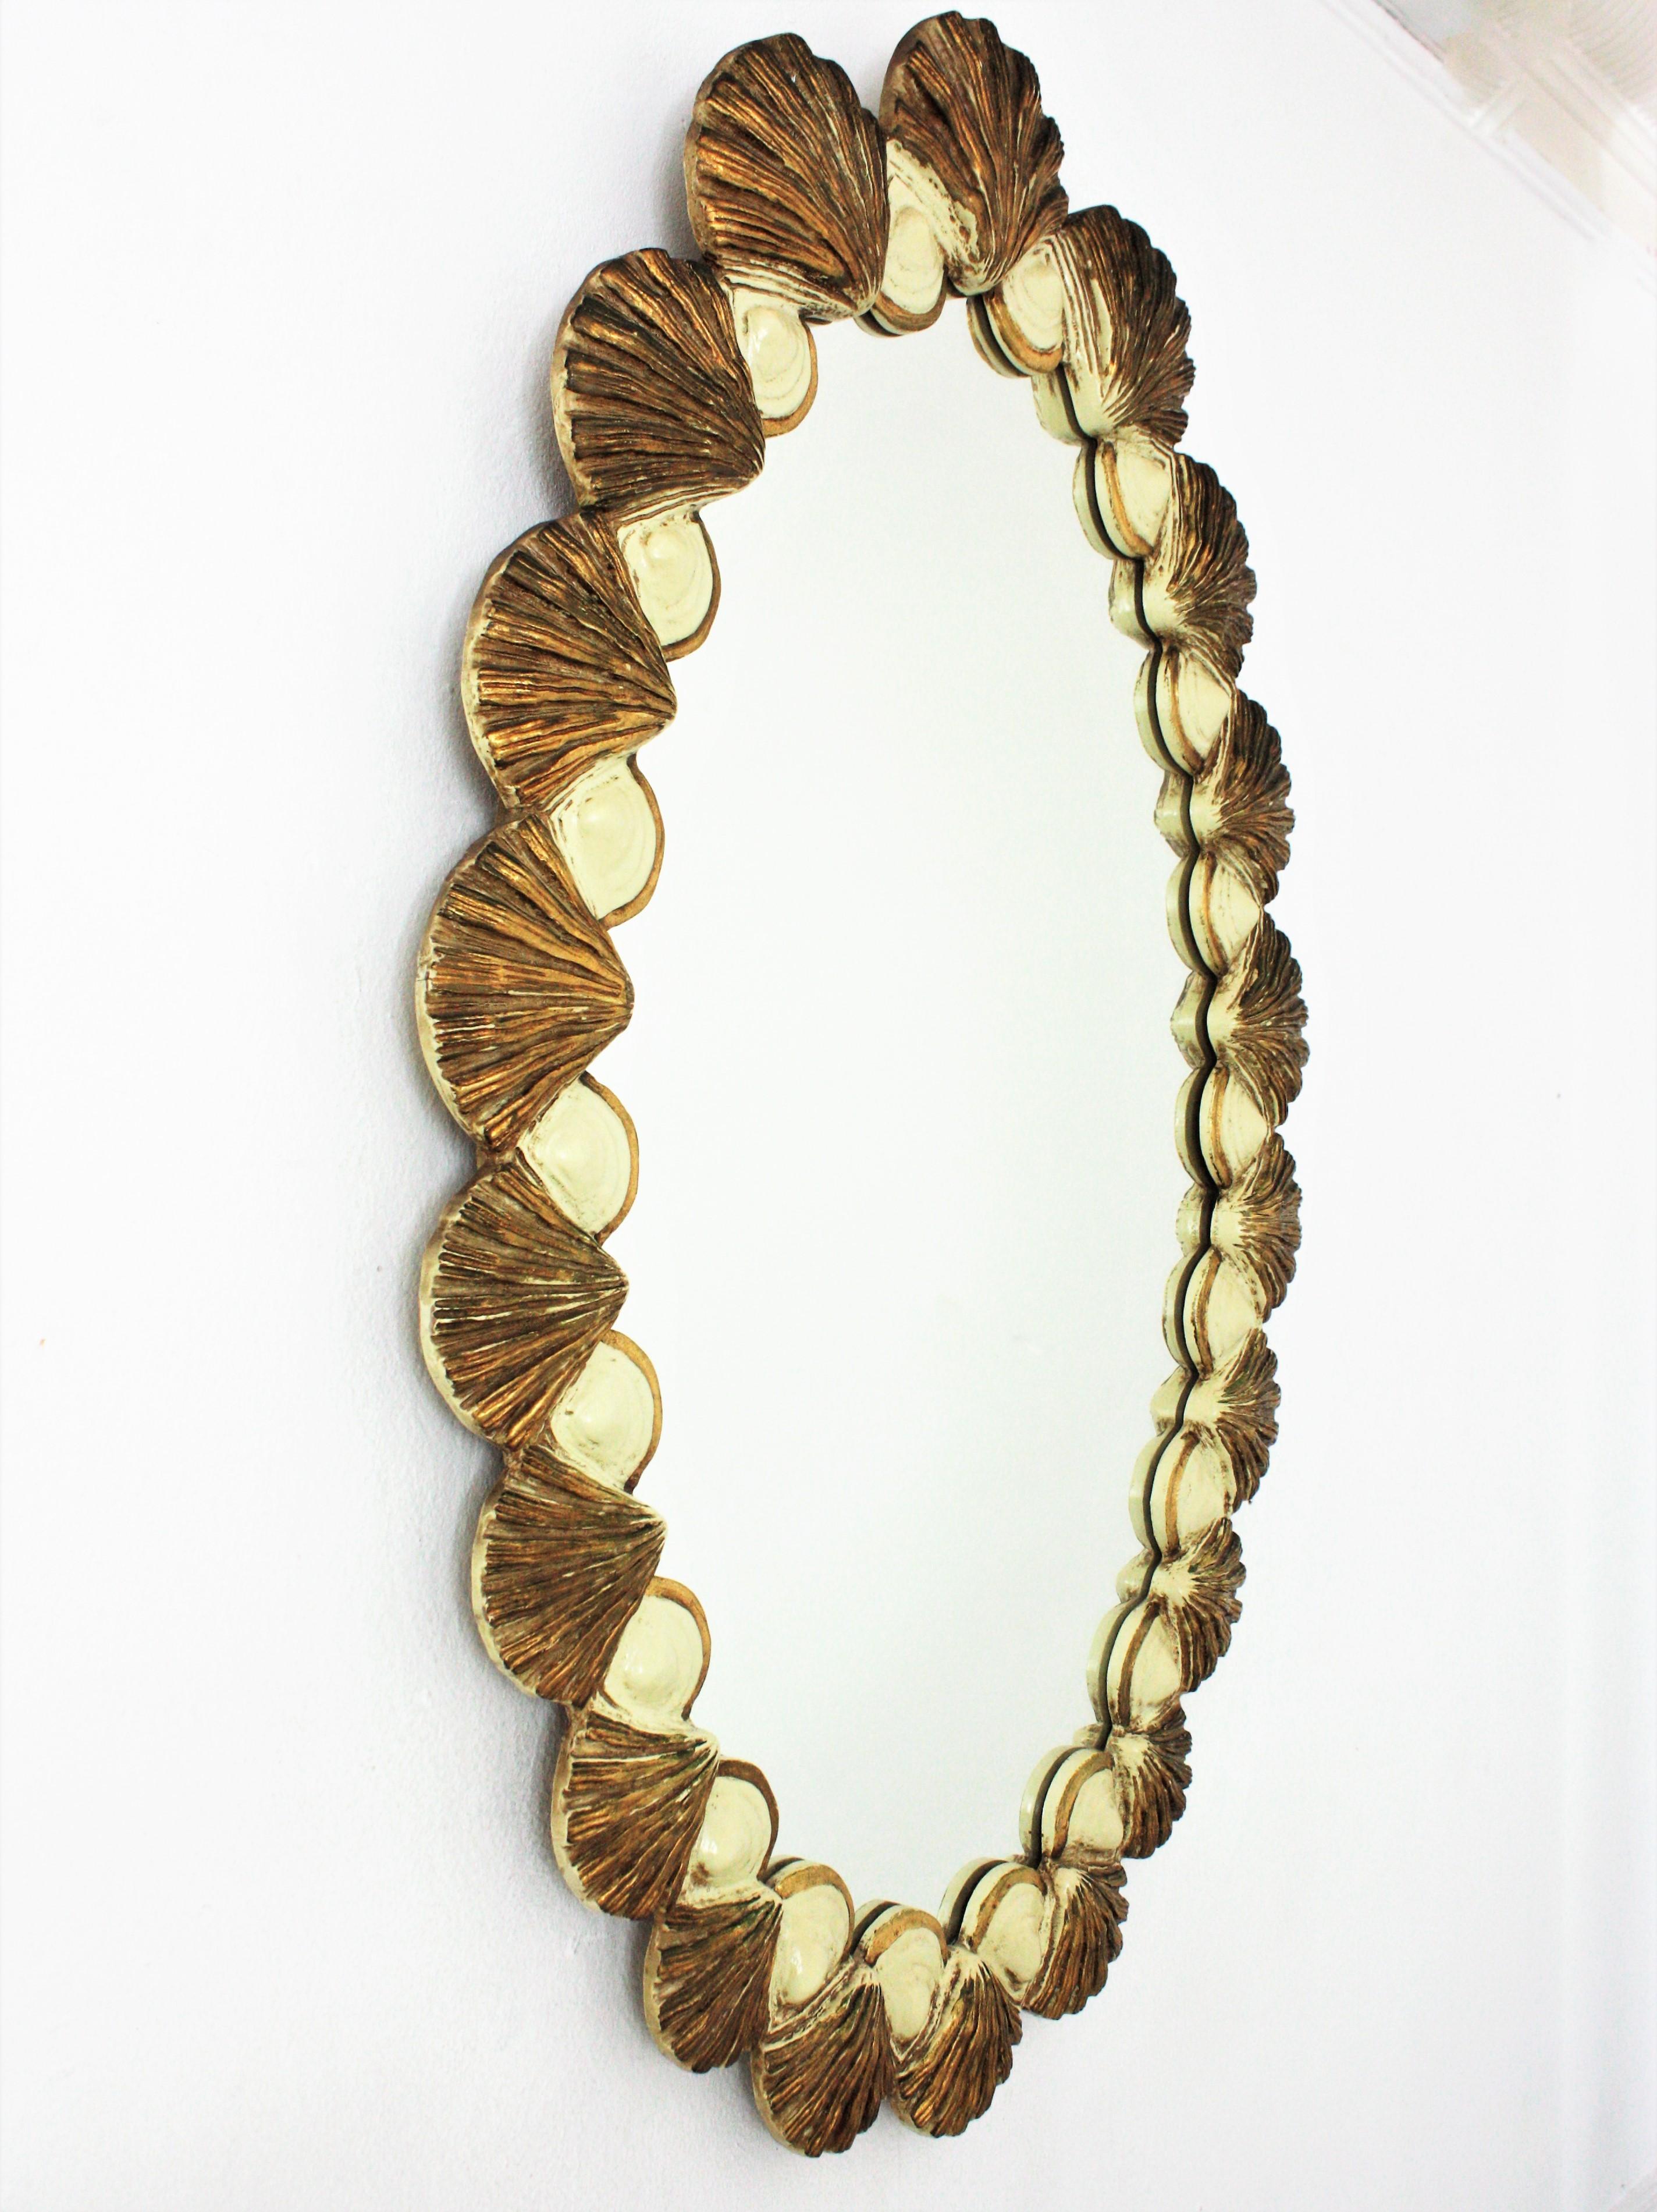 Gesso Giltwood Beige Oval Mirror with Shell Motif Carved Frame, 1950s For Sale